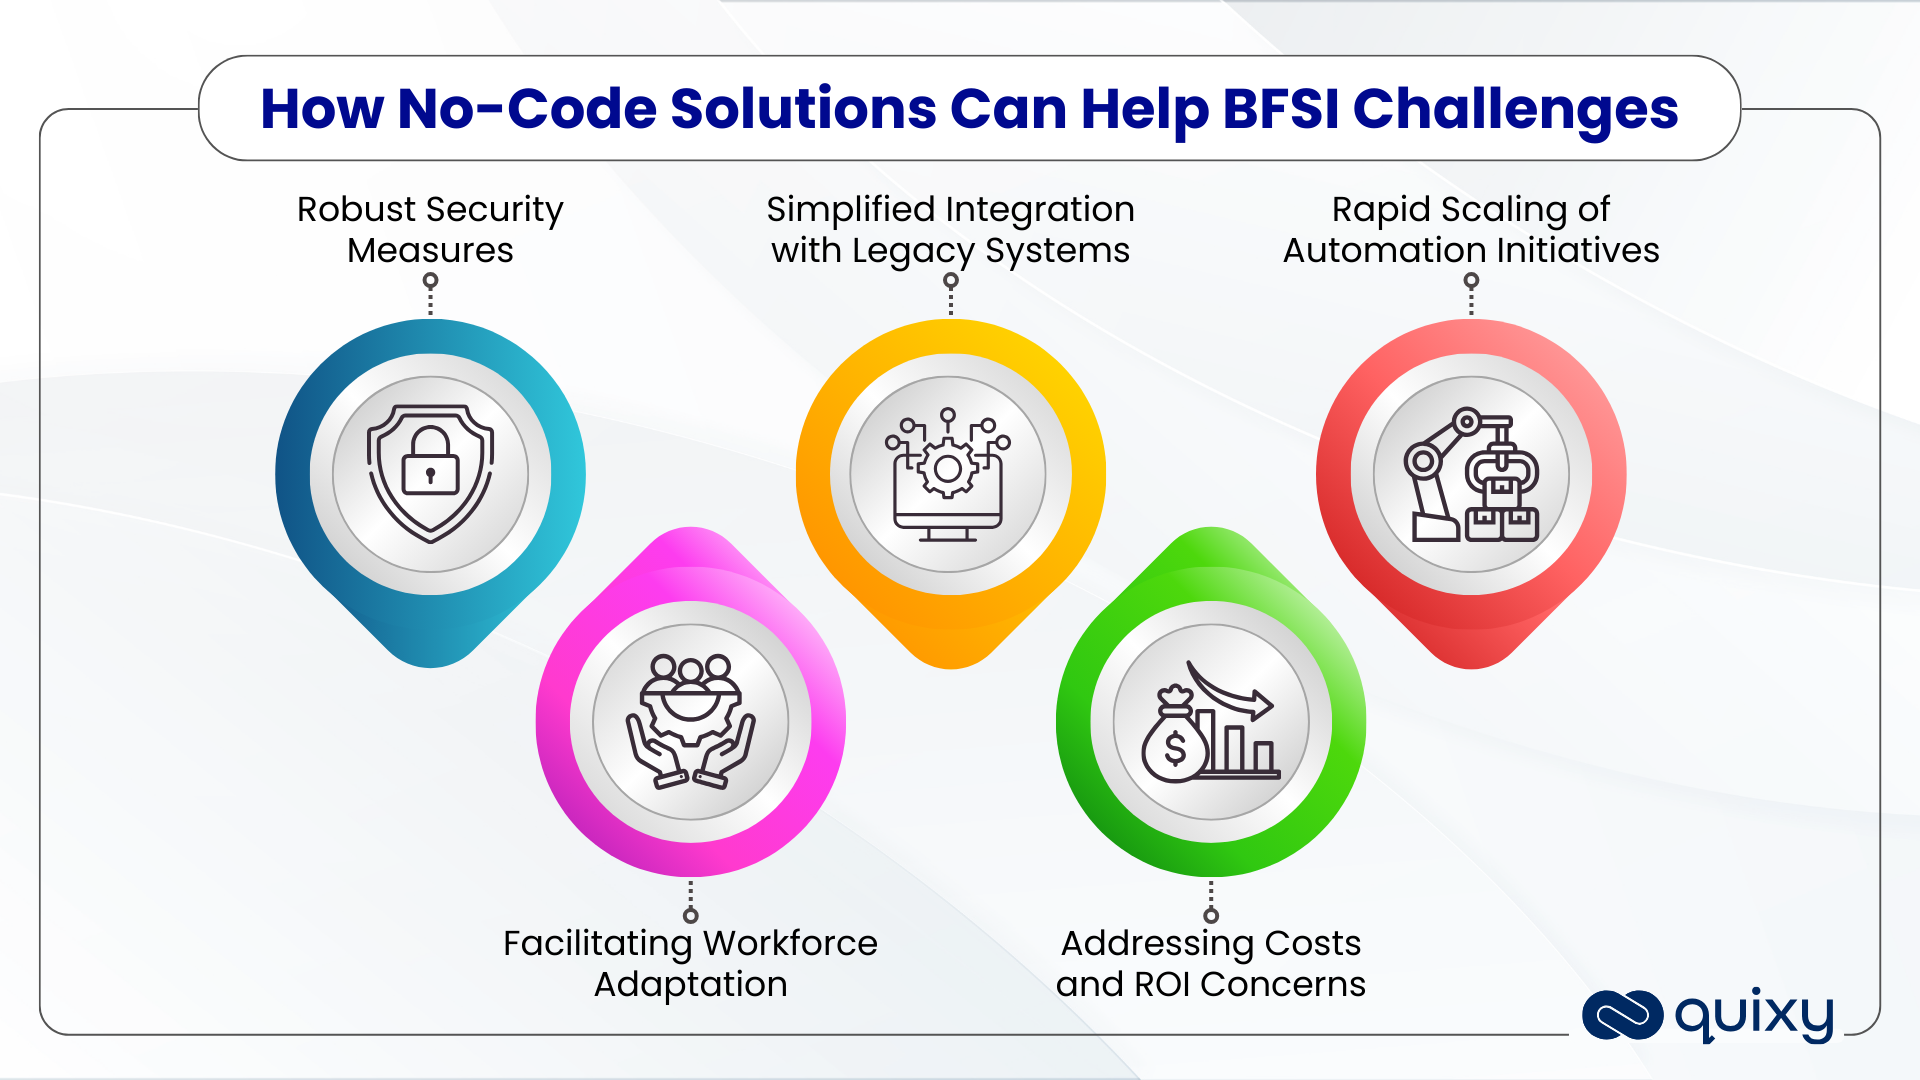 How No-Code Solutions Can Help BFSI Challenges